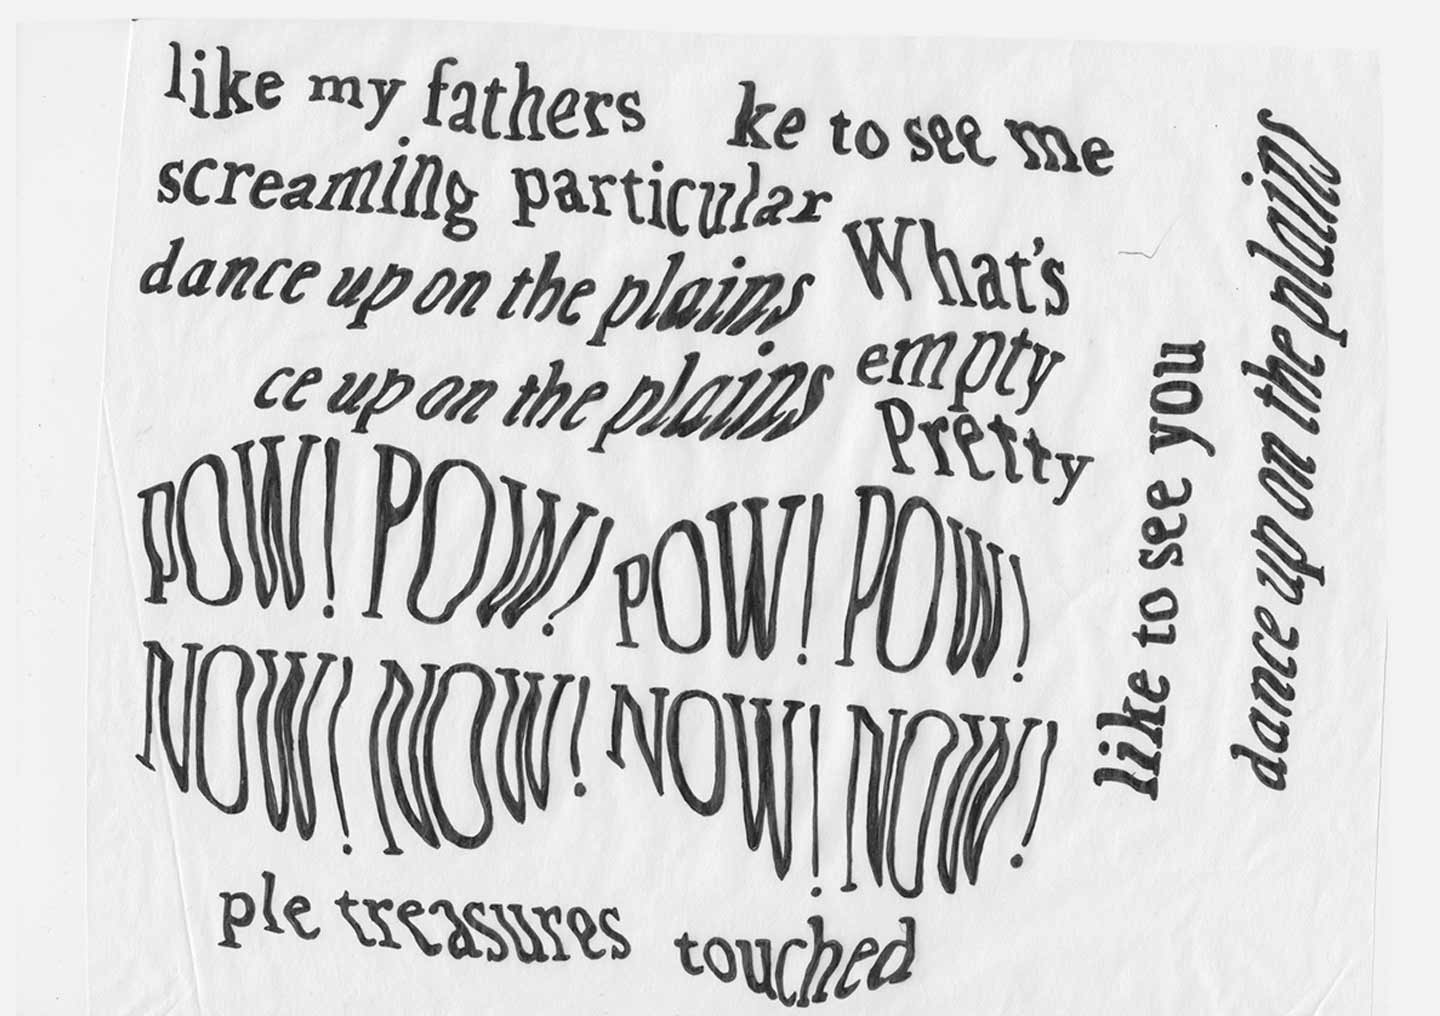 Scan of several warped words, hand drawn